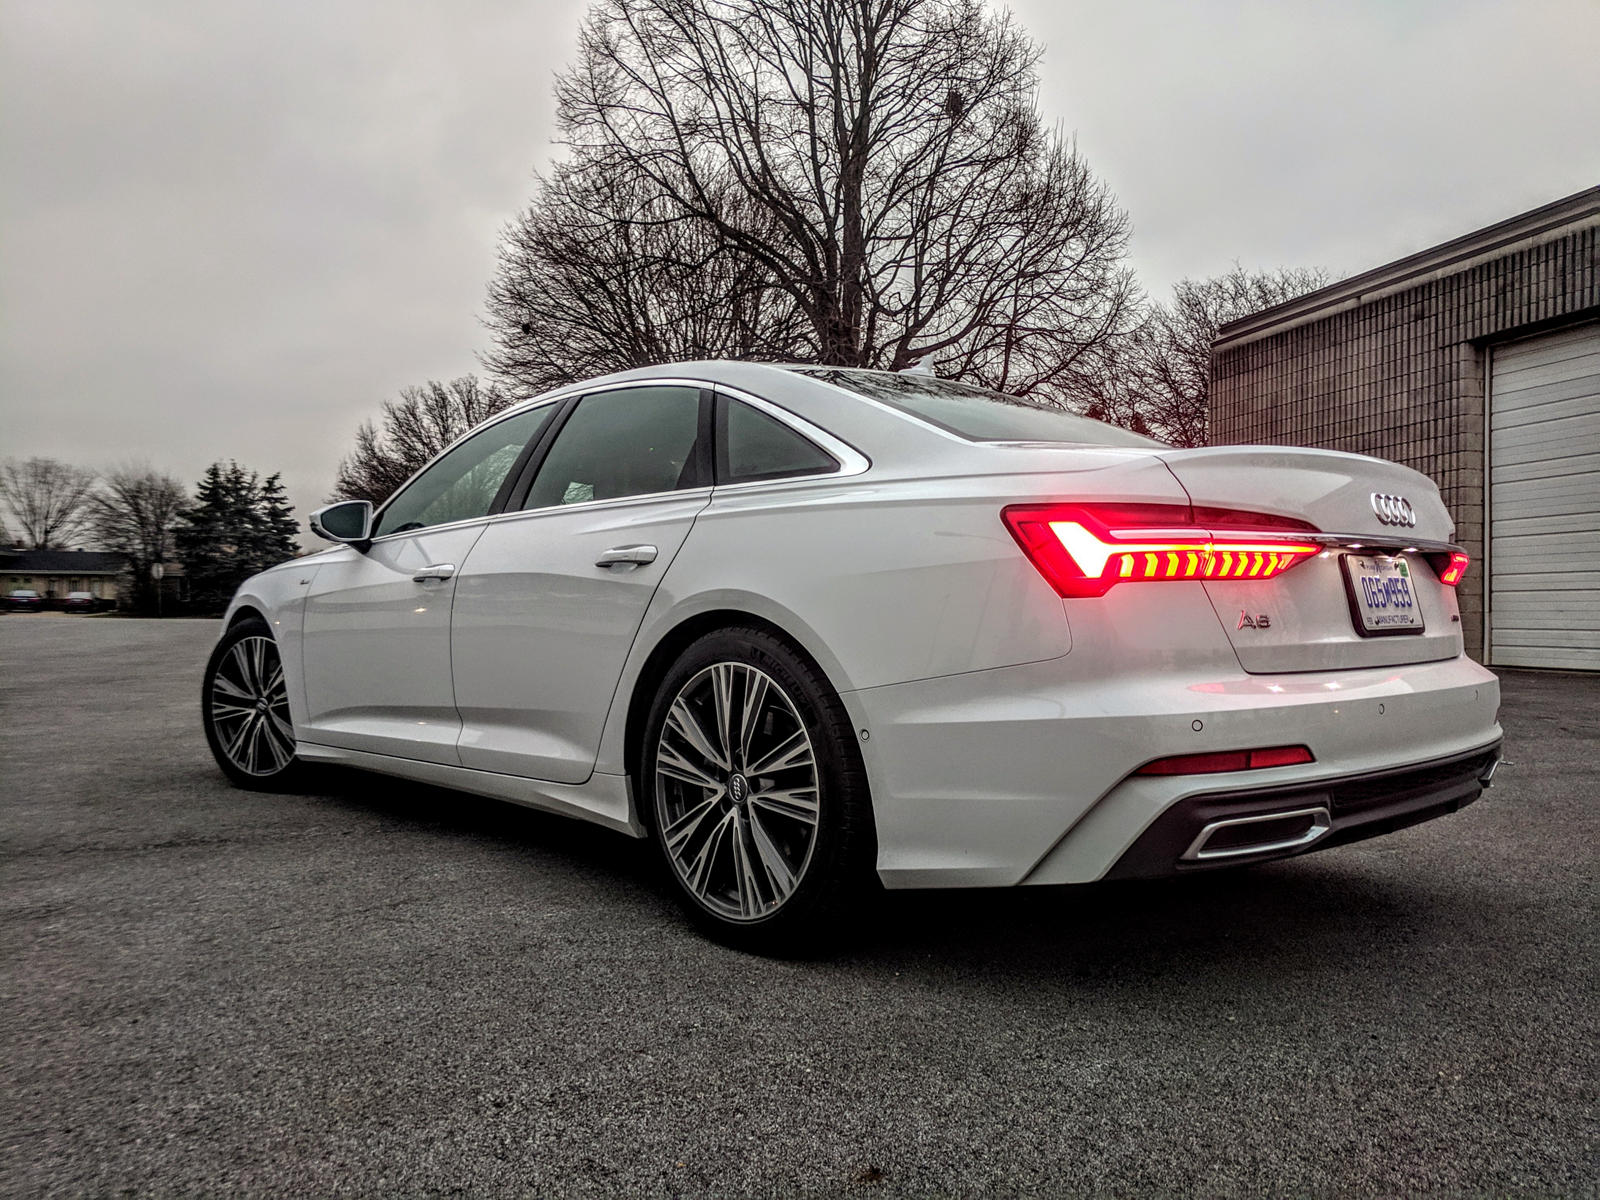 2019 Audi A6 First Drive: Redesigned from the Inside Out, Review